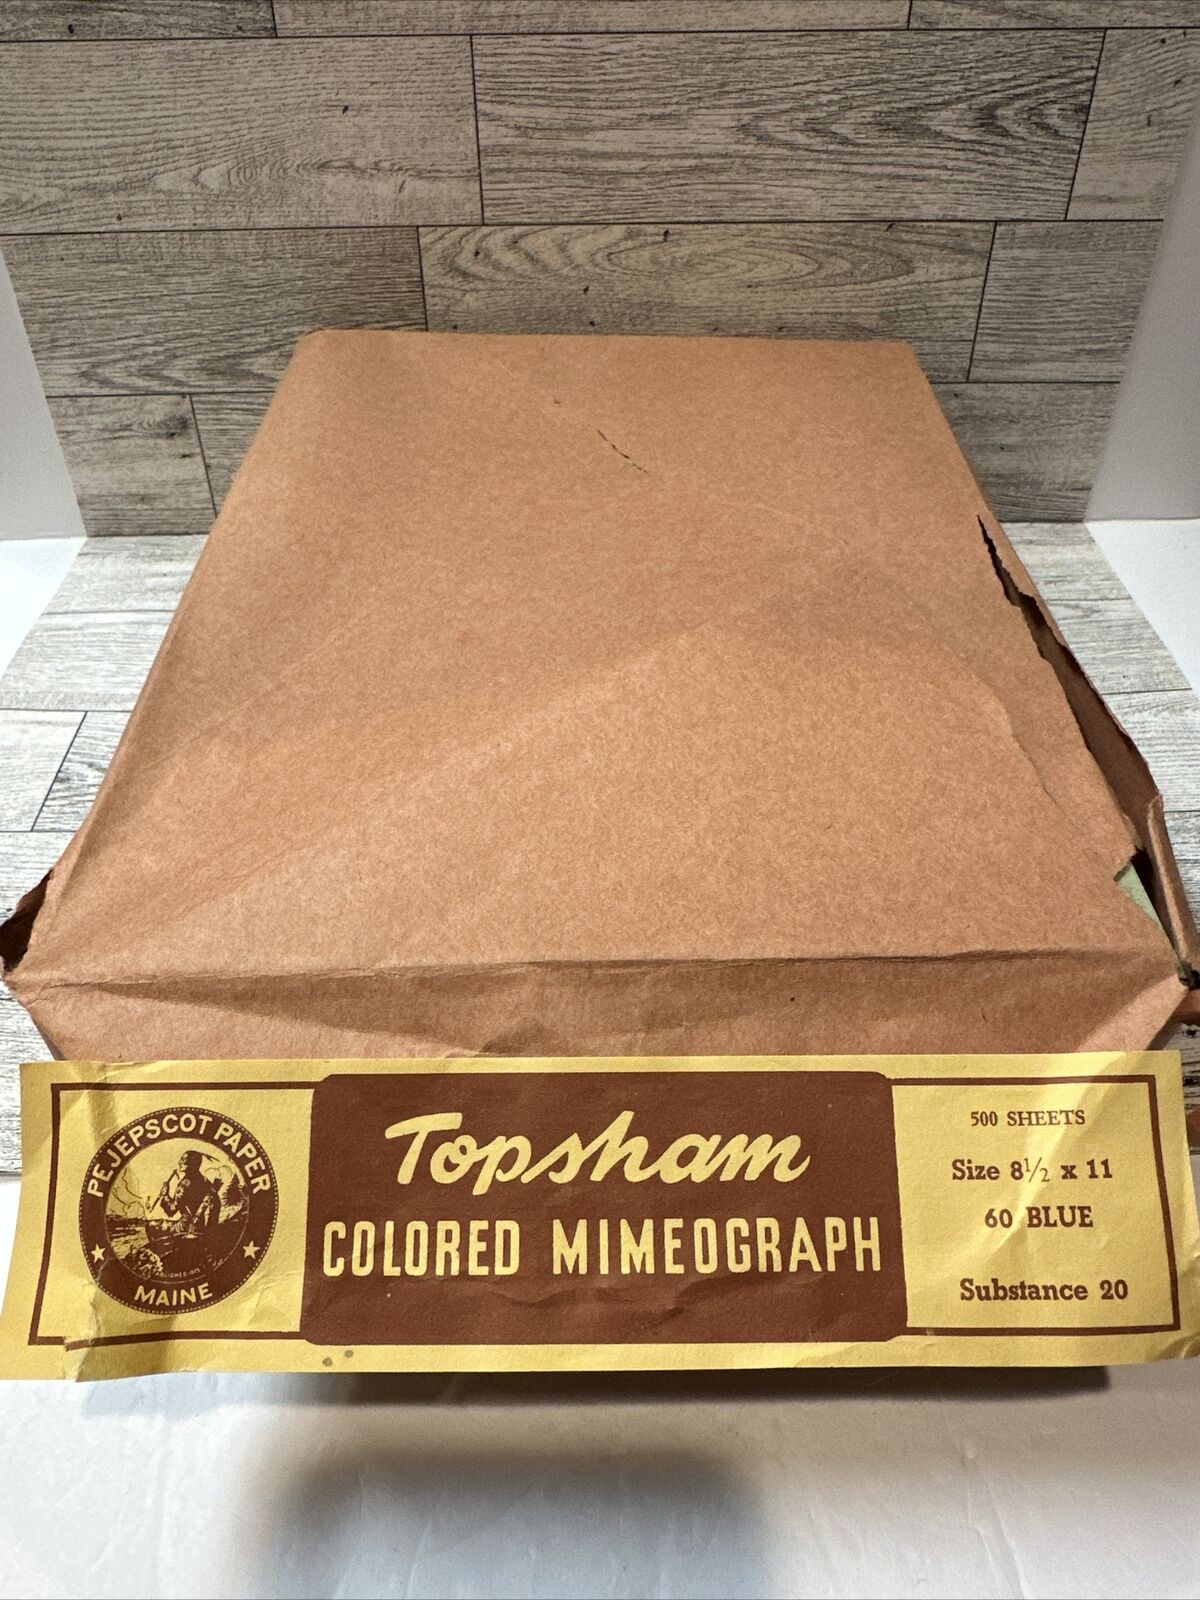 TOPSHAM Colored 60 Blue Mimeograph Paper 500 Sheets 8.5x11 *Damaged Package*